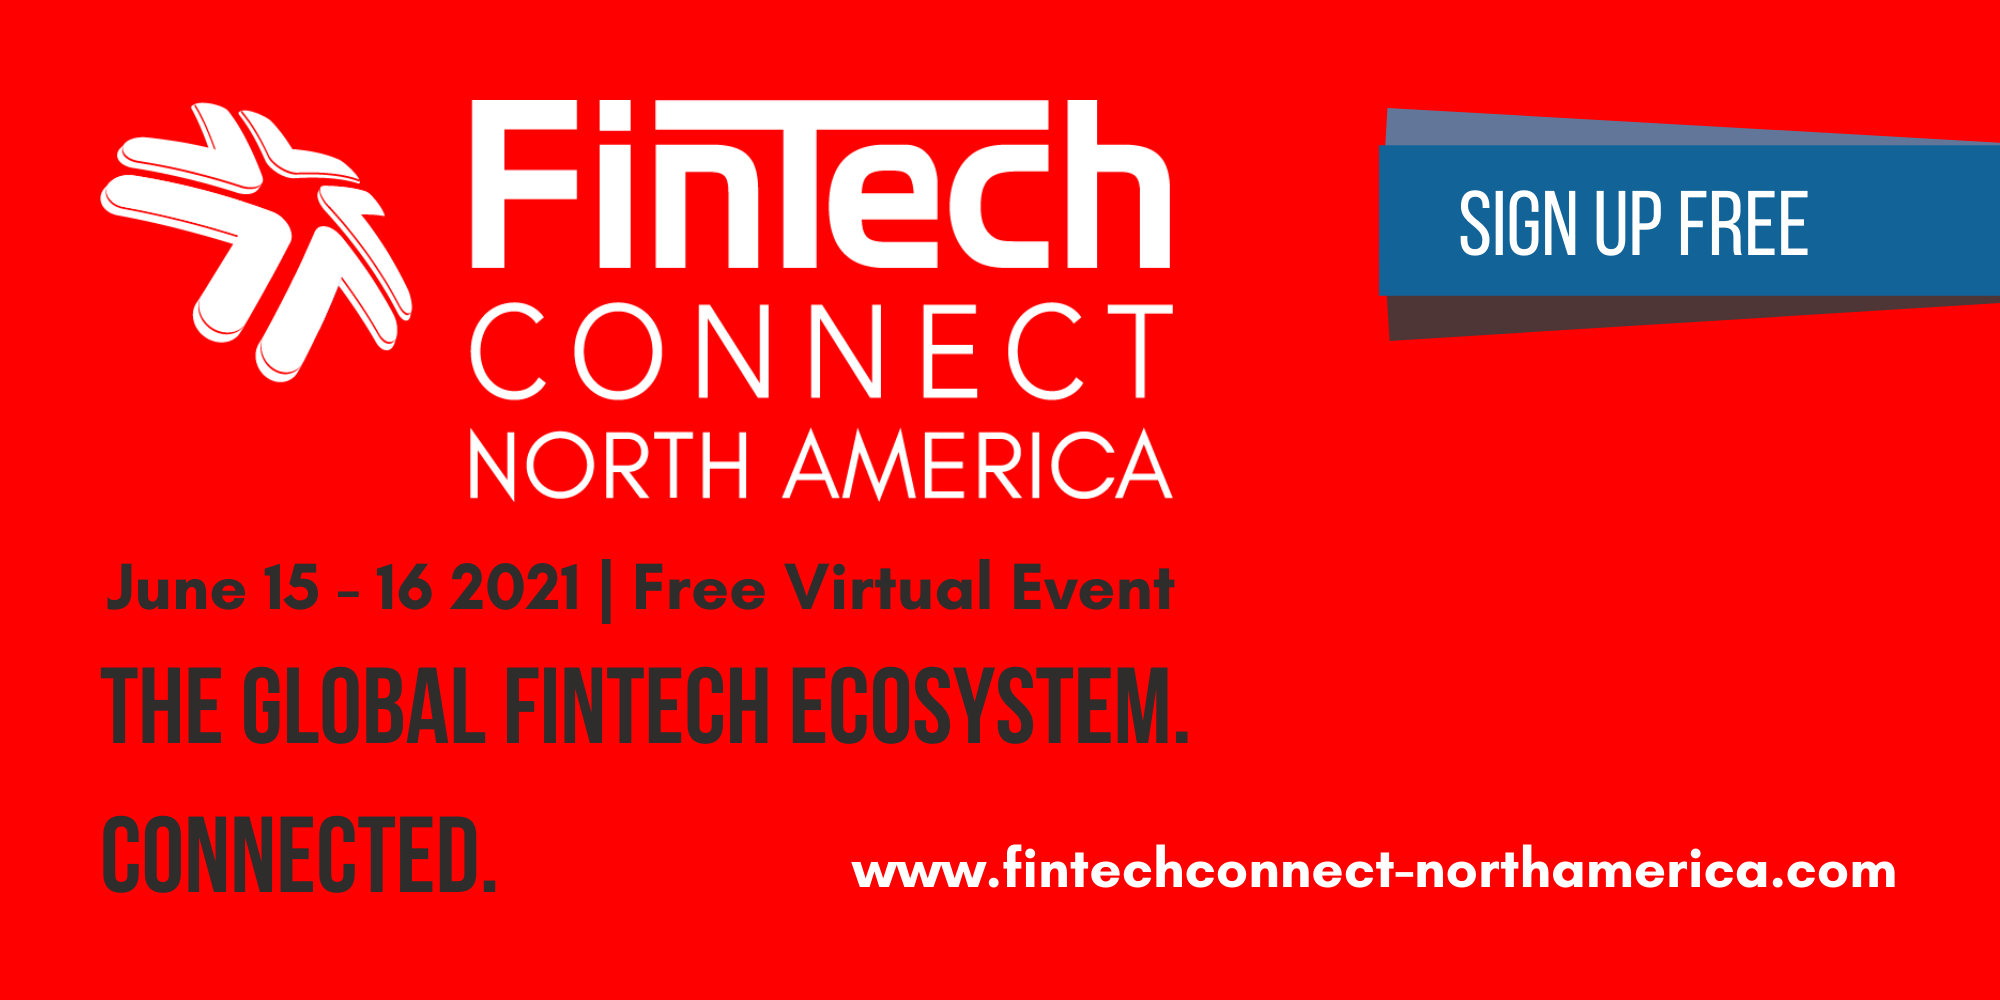 FinTech Connect North America organized by FinTech Connect North America